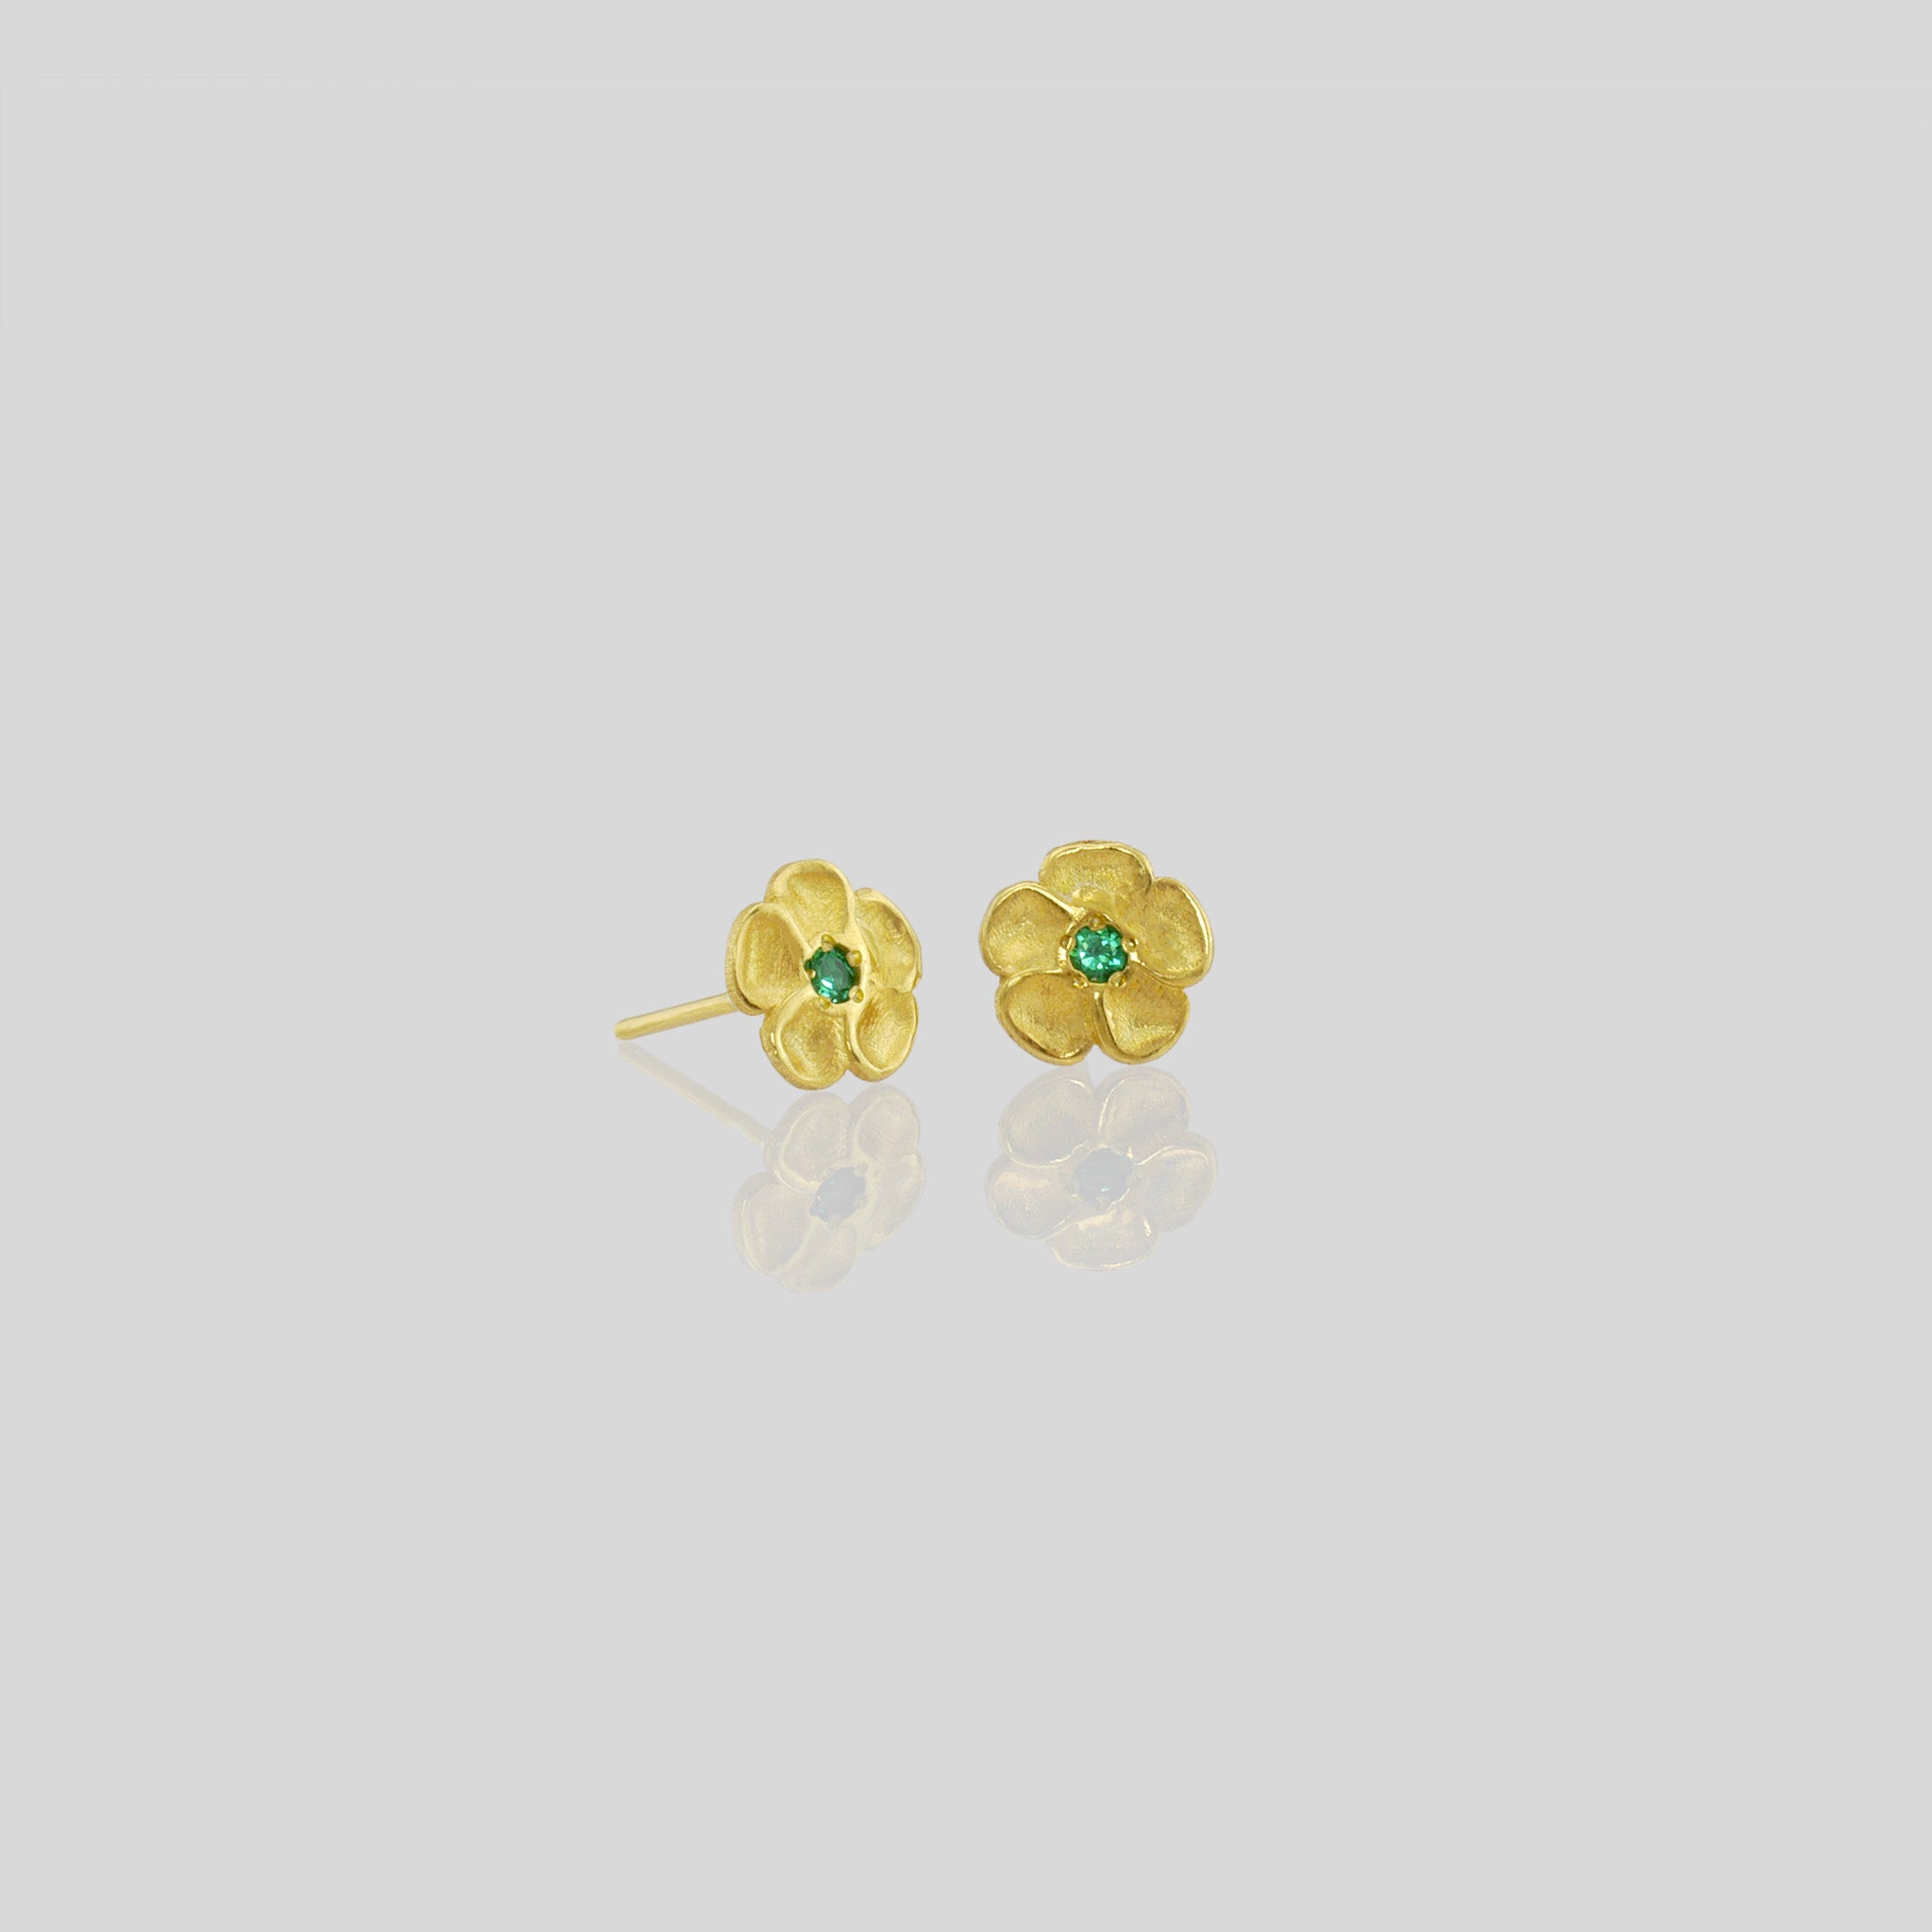 Delicate yellow gold flower stud earrings with a sparkling Emerald center. Perfect for any occasion!